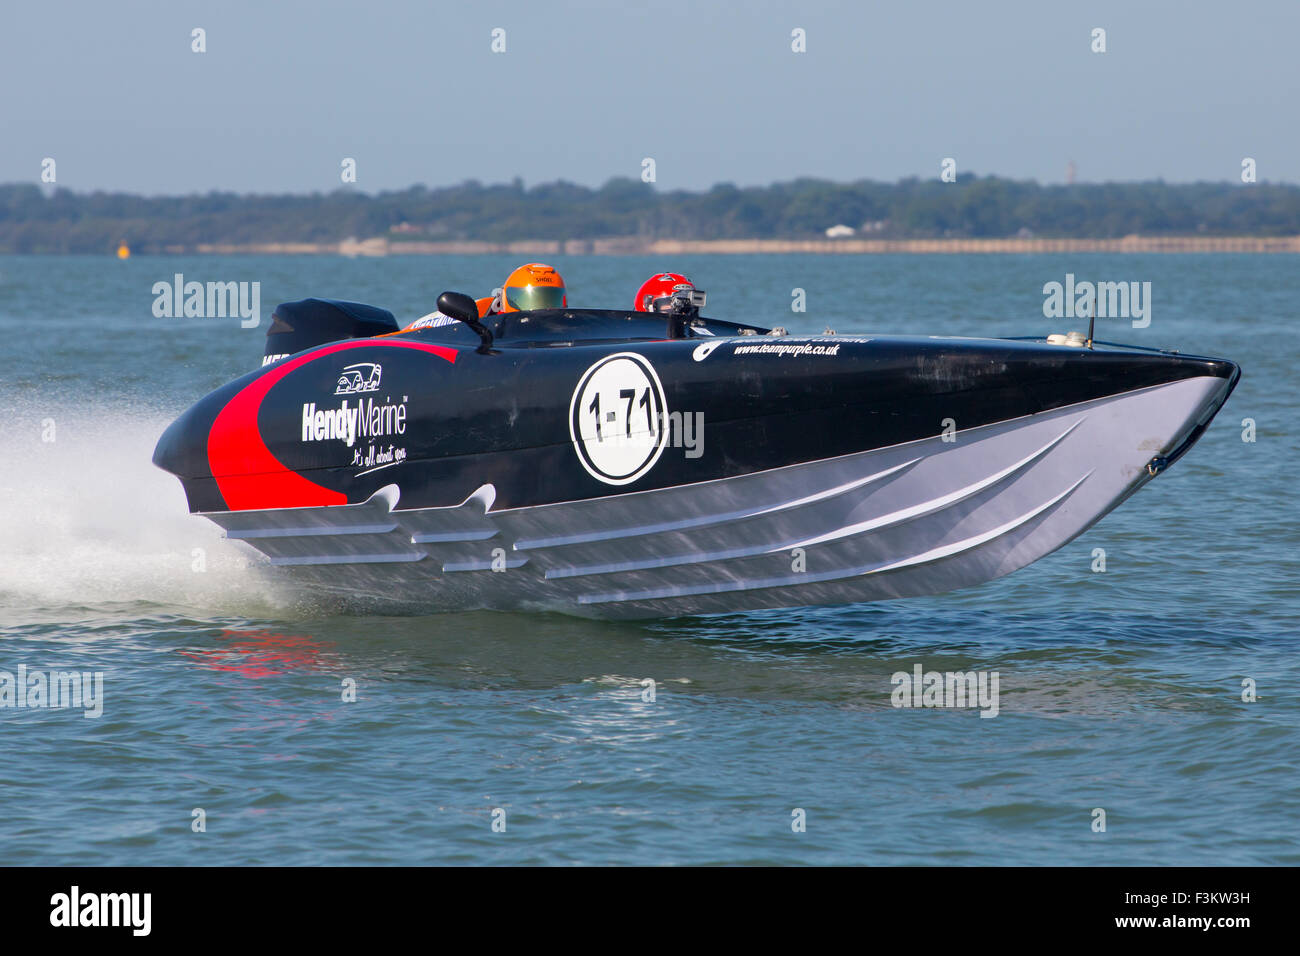 The Solent 2015, Cowes Classic, Power Boat Race, Cowes, Isle of Wight, England, UK, Stock Photo